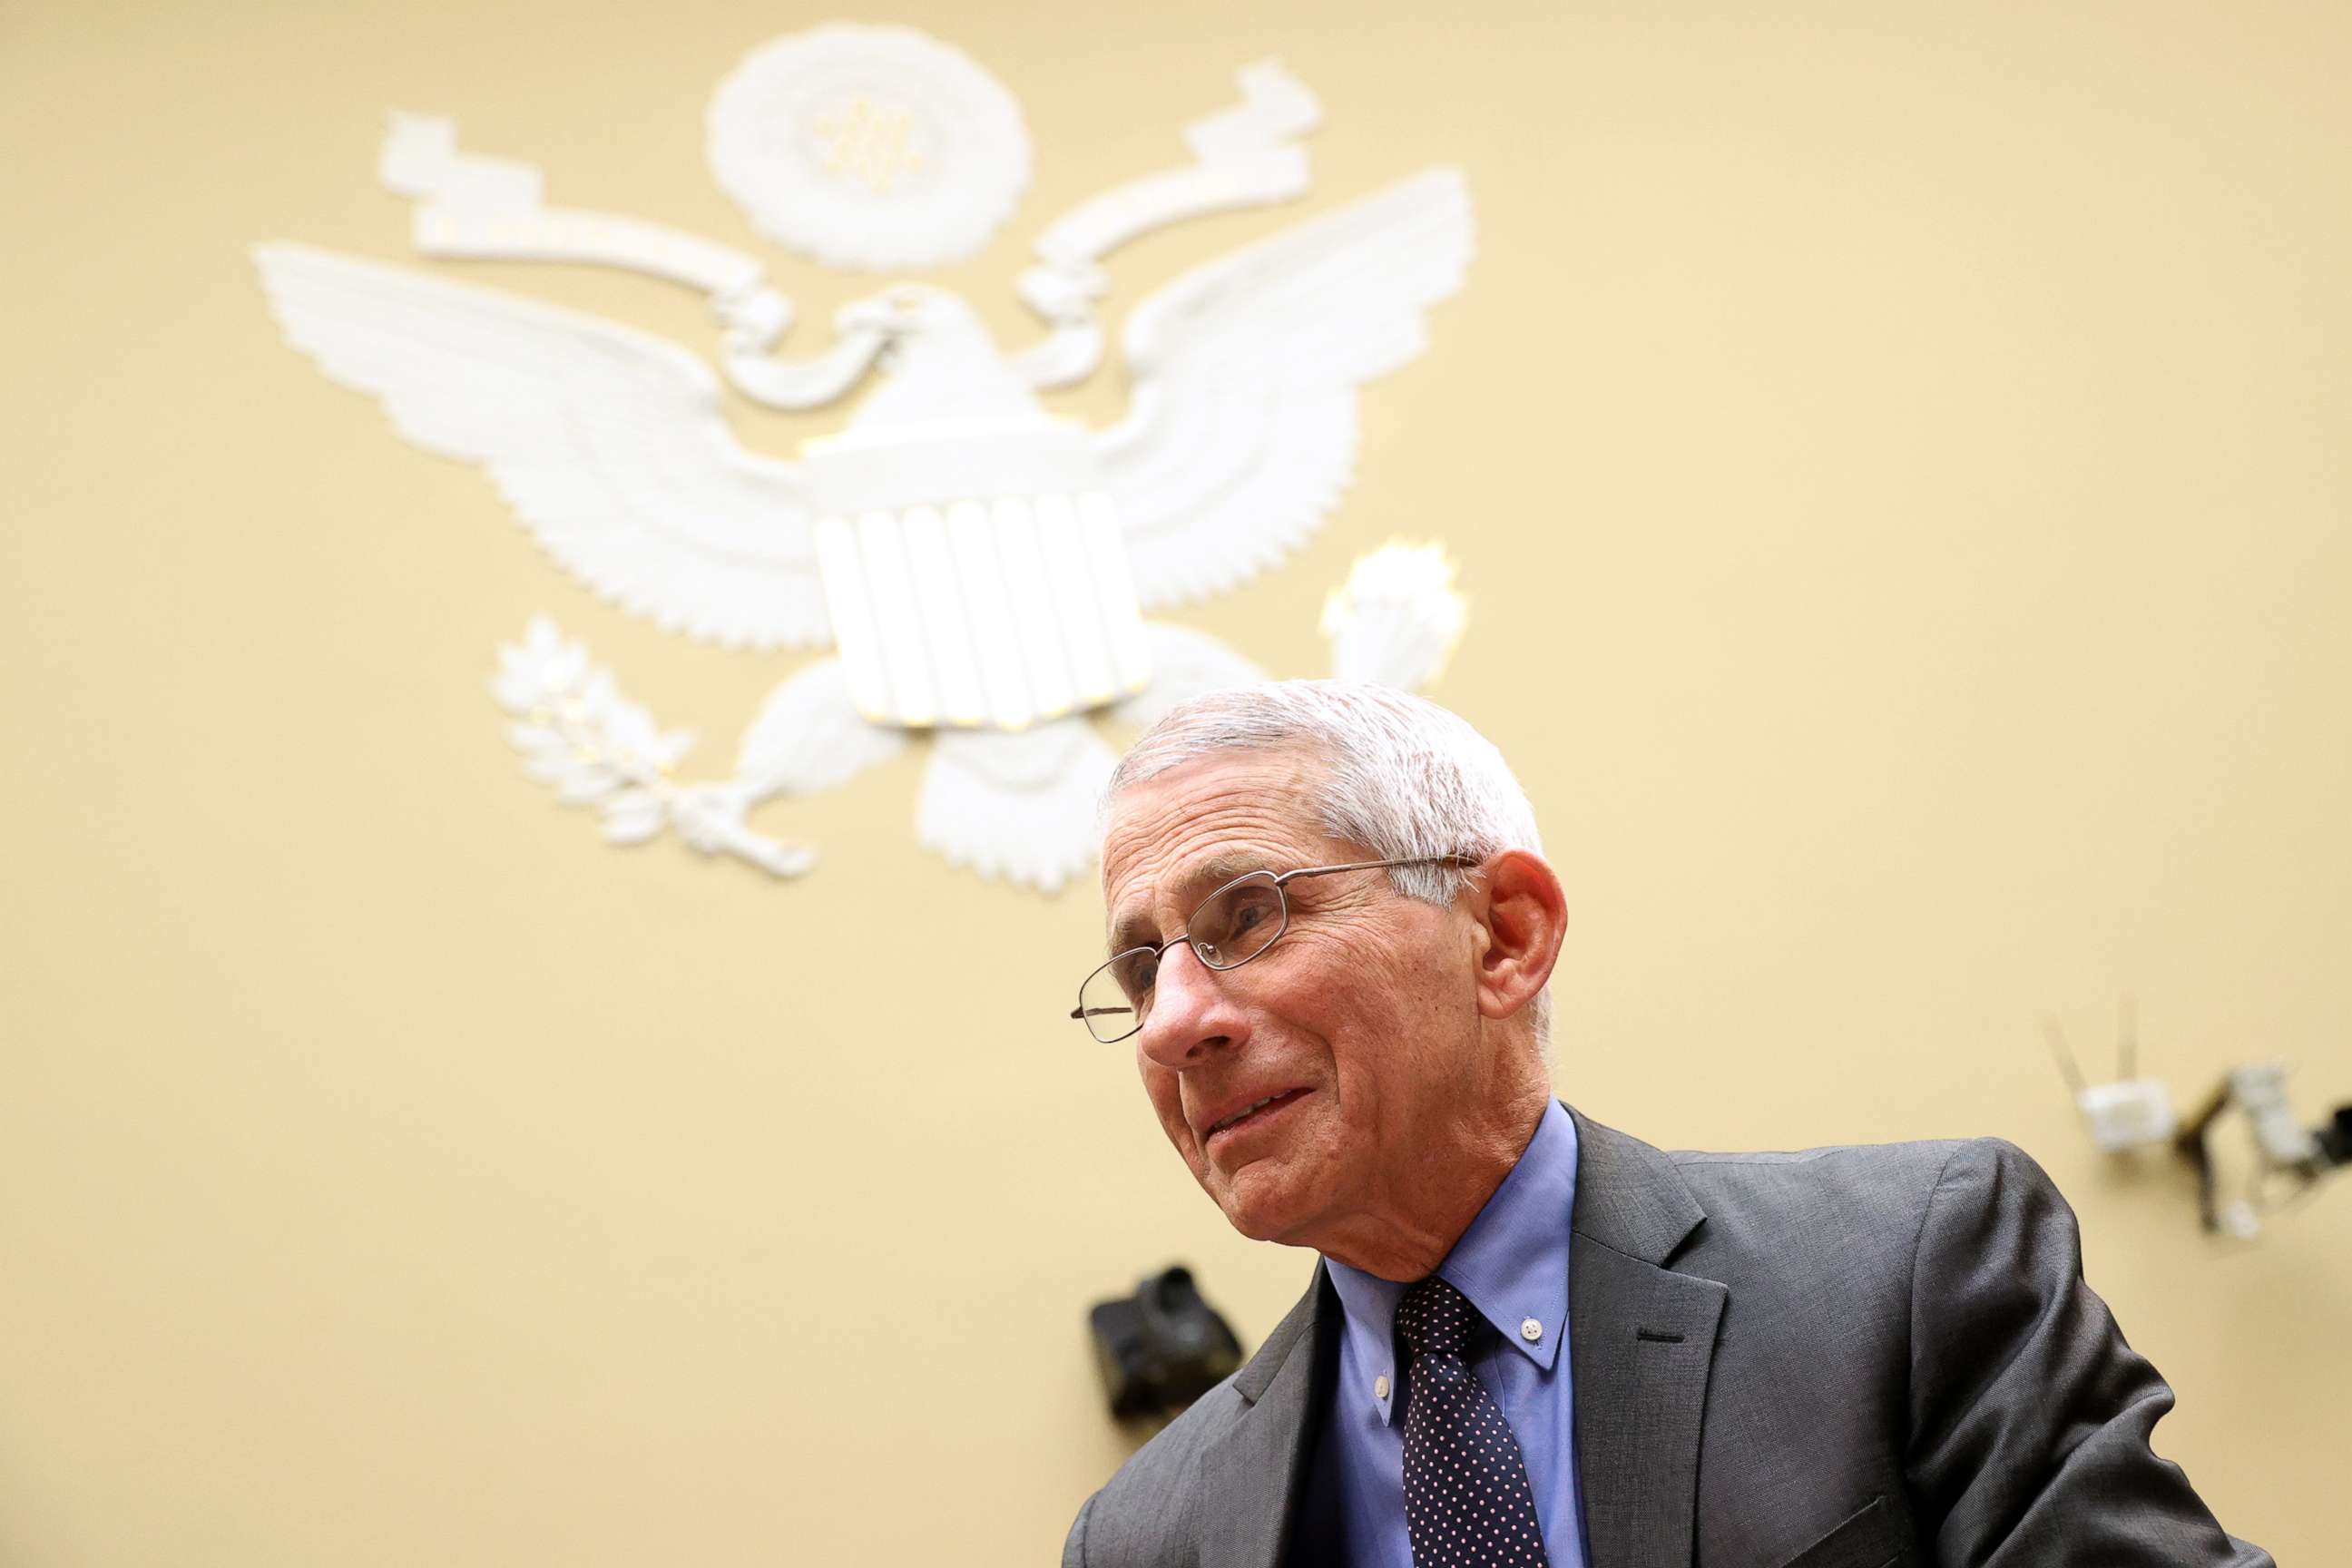 PHOTO: Anthony Fauci, director of the NIH National Institute of Allergy and Infectious Diseases appears during a House Oversight and Reform Committee hearing on Coronavirus Preparedness and Response, March 12, 2020, in Washington, D.C. 